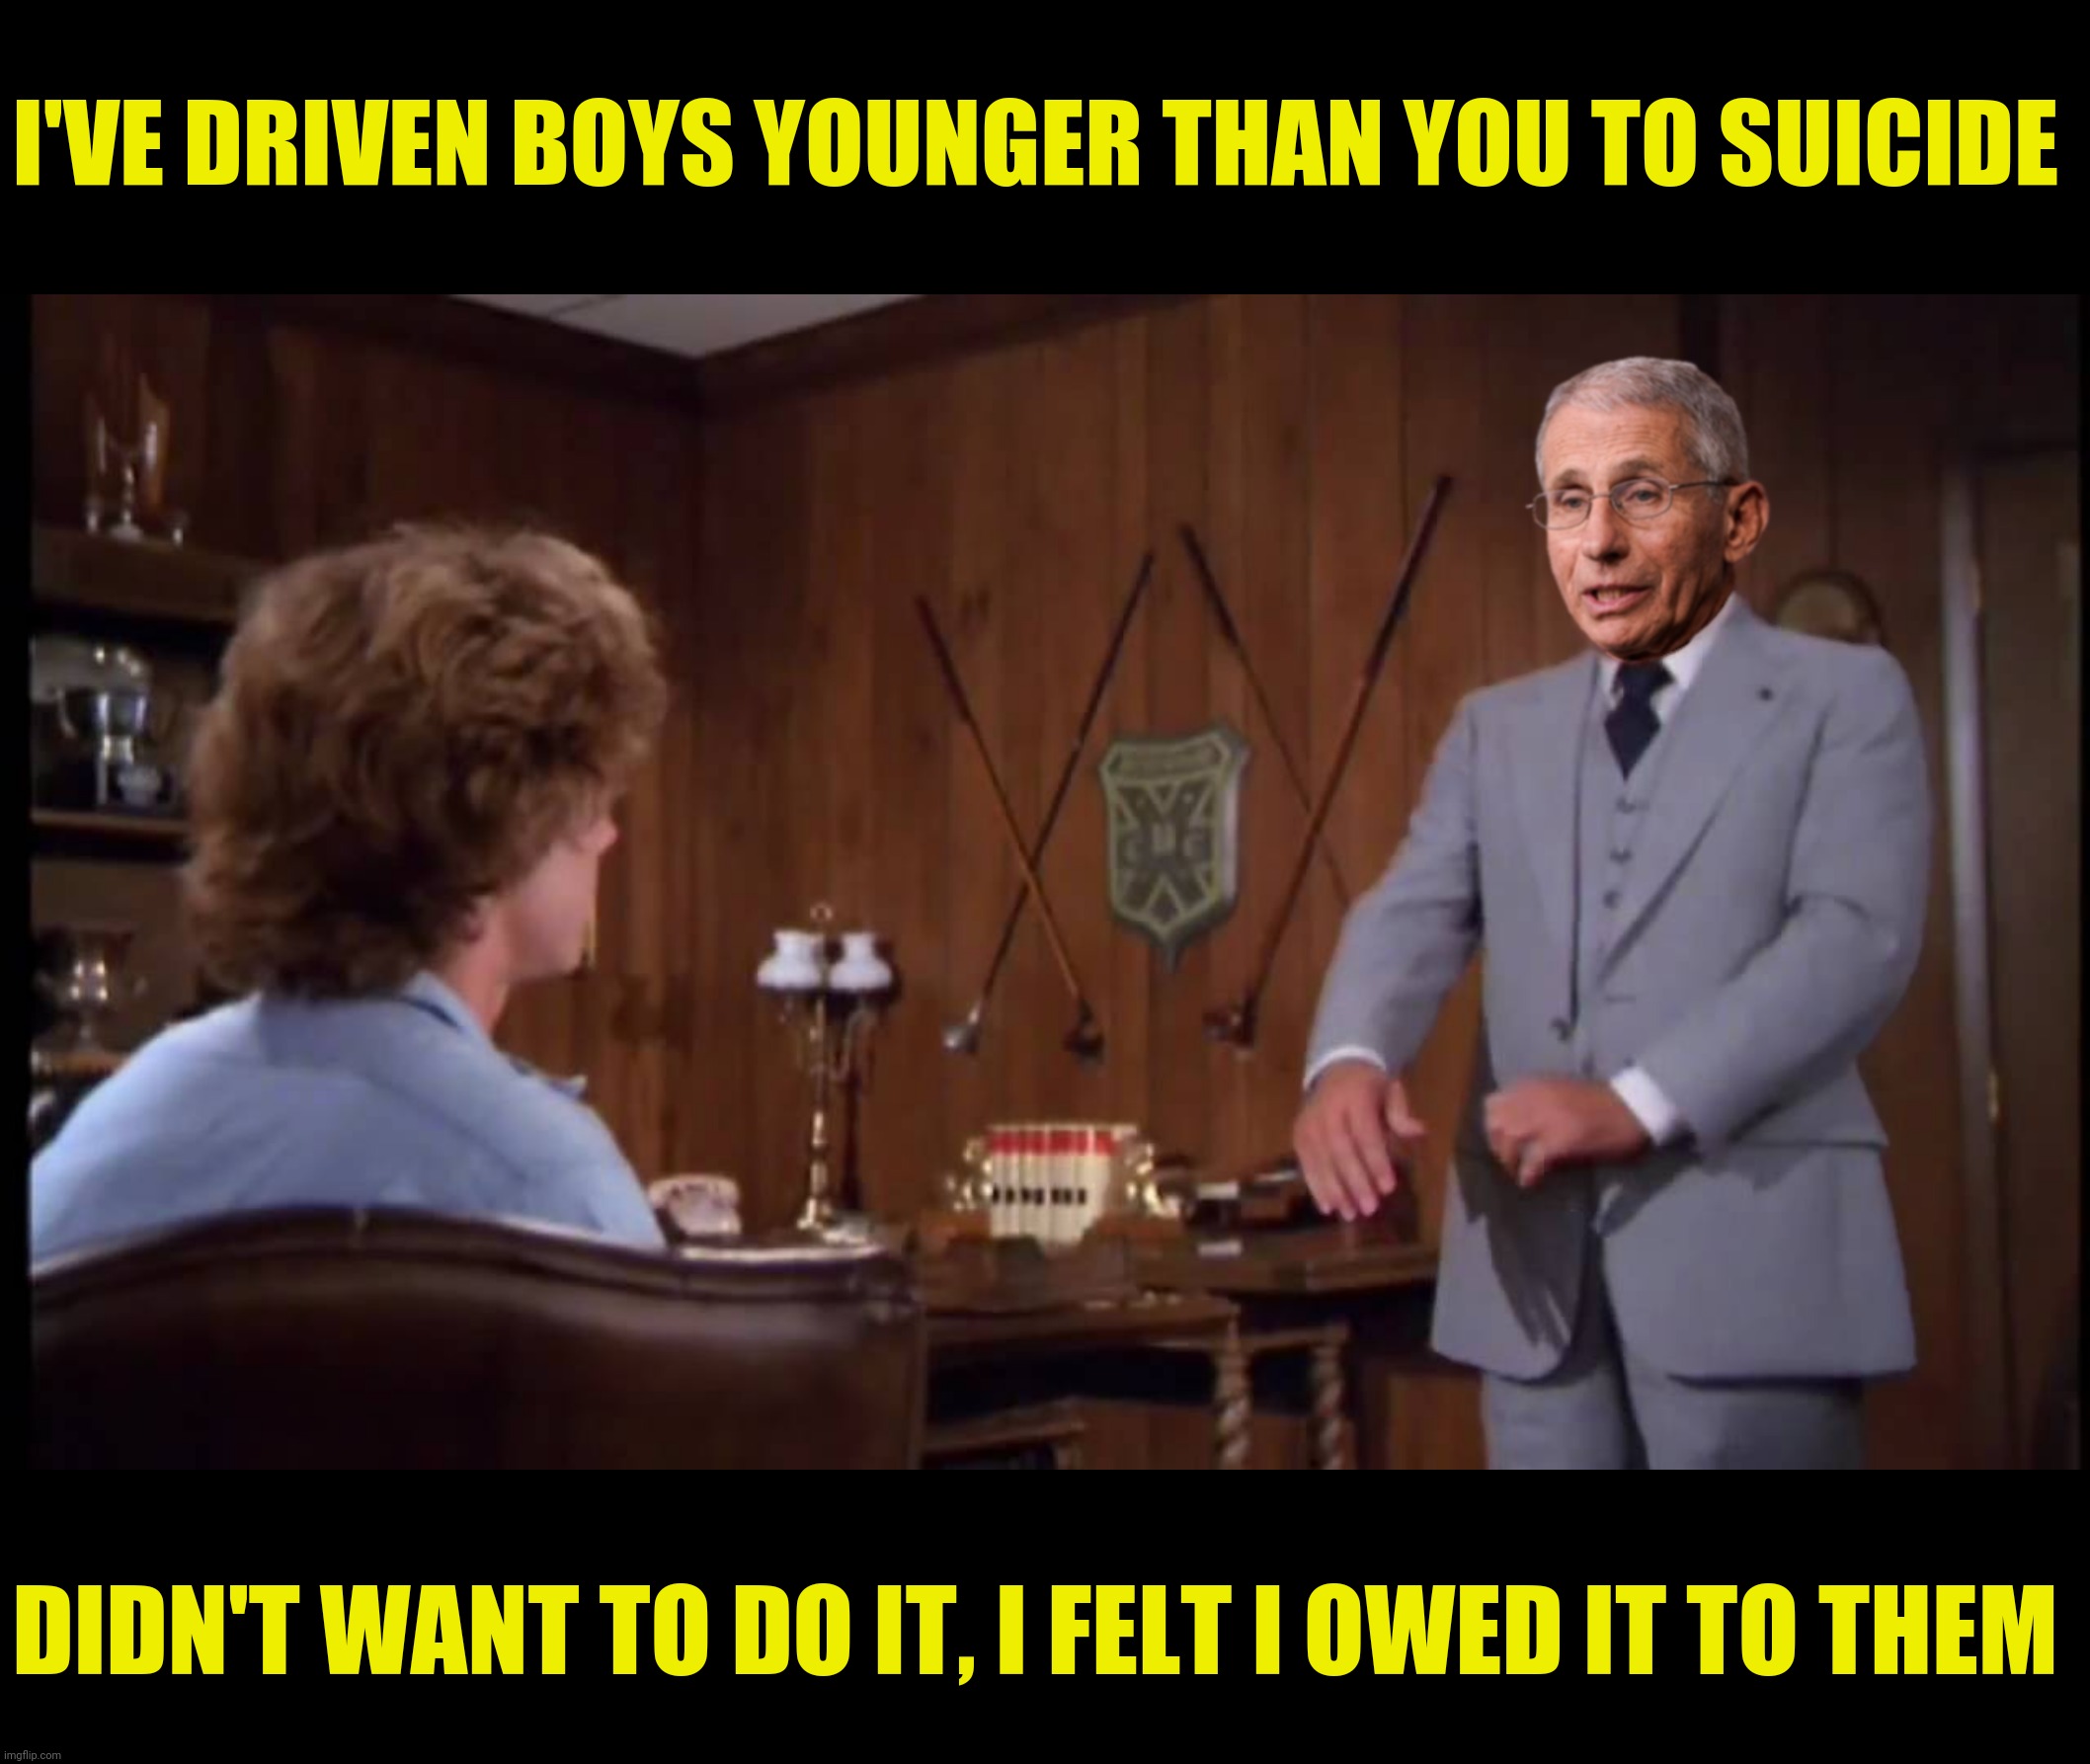 I'VE DRIVEN BOYS YOUNGER THAN YOU TO SUICIDE DIDN'T WANT TO DO IT, I FELT I OWED IT TO THEM | made w/ Imgflip meme maker